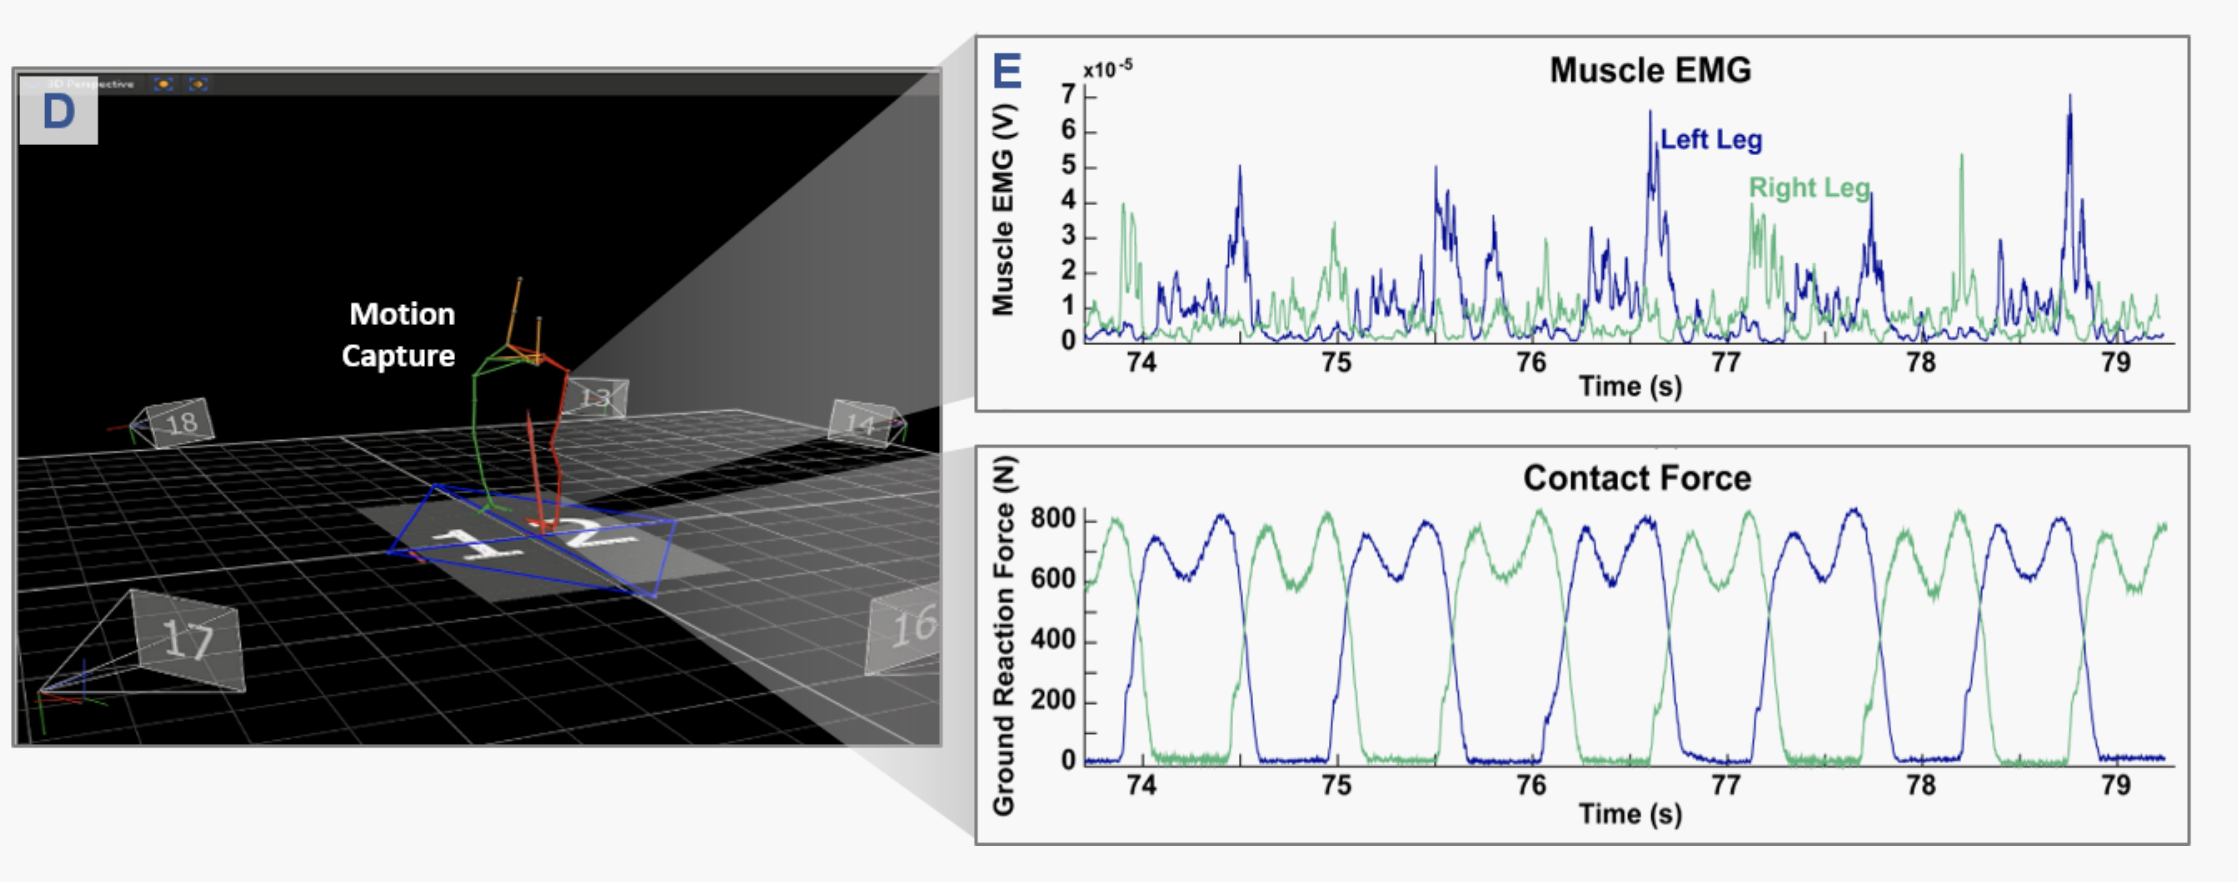 Motion-capture data of the participant is collected concurrently with the perturbation. A subset of the signals collected during the experiment using the CAREN system instrumentation are shown above. 